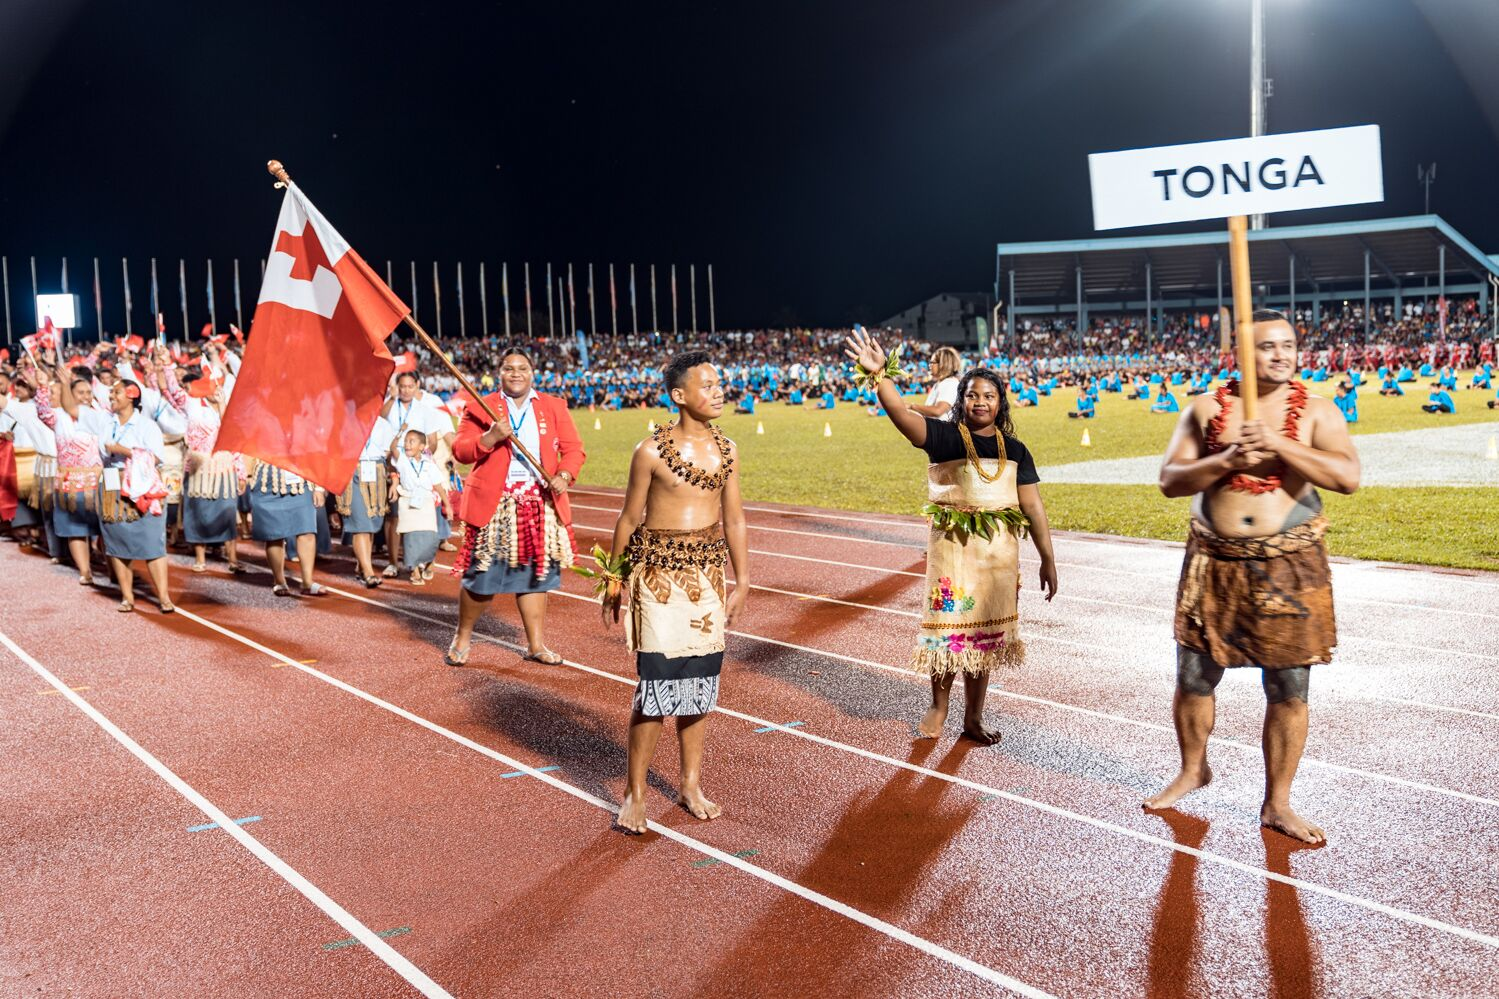 Tonga have expressed interest in hosting the 2027 Pacific Games © Samoa 201...